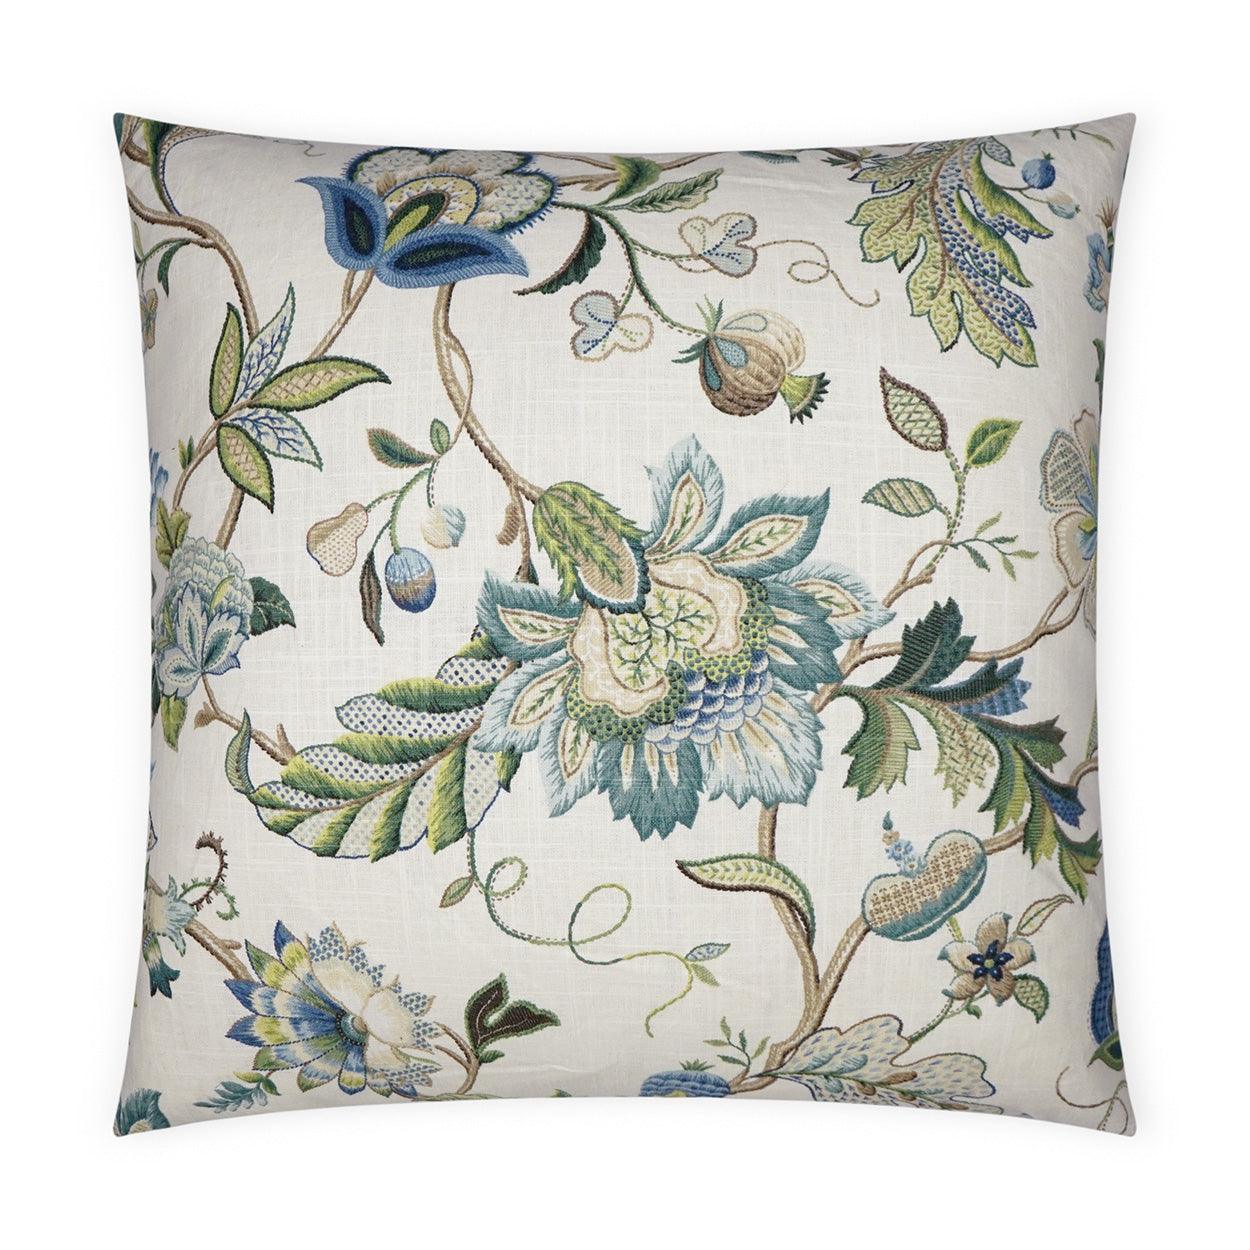 Brissac Floral Traditional Blue Green Large Throw Pillow With Insert - Uptown Sebastian